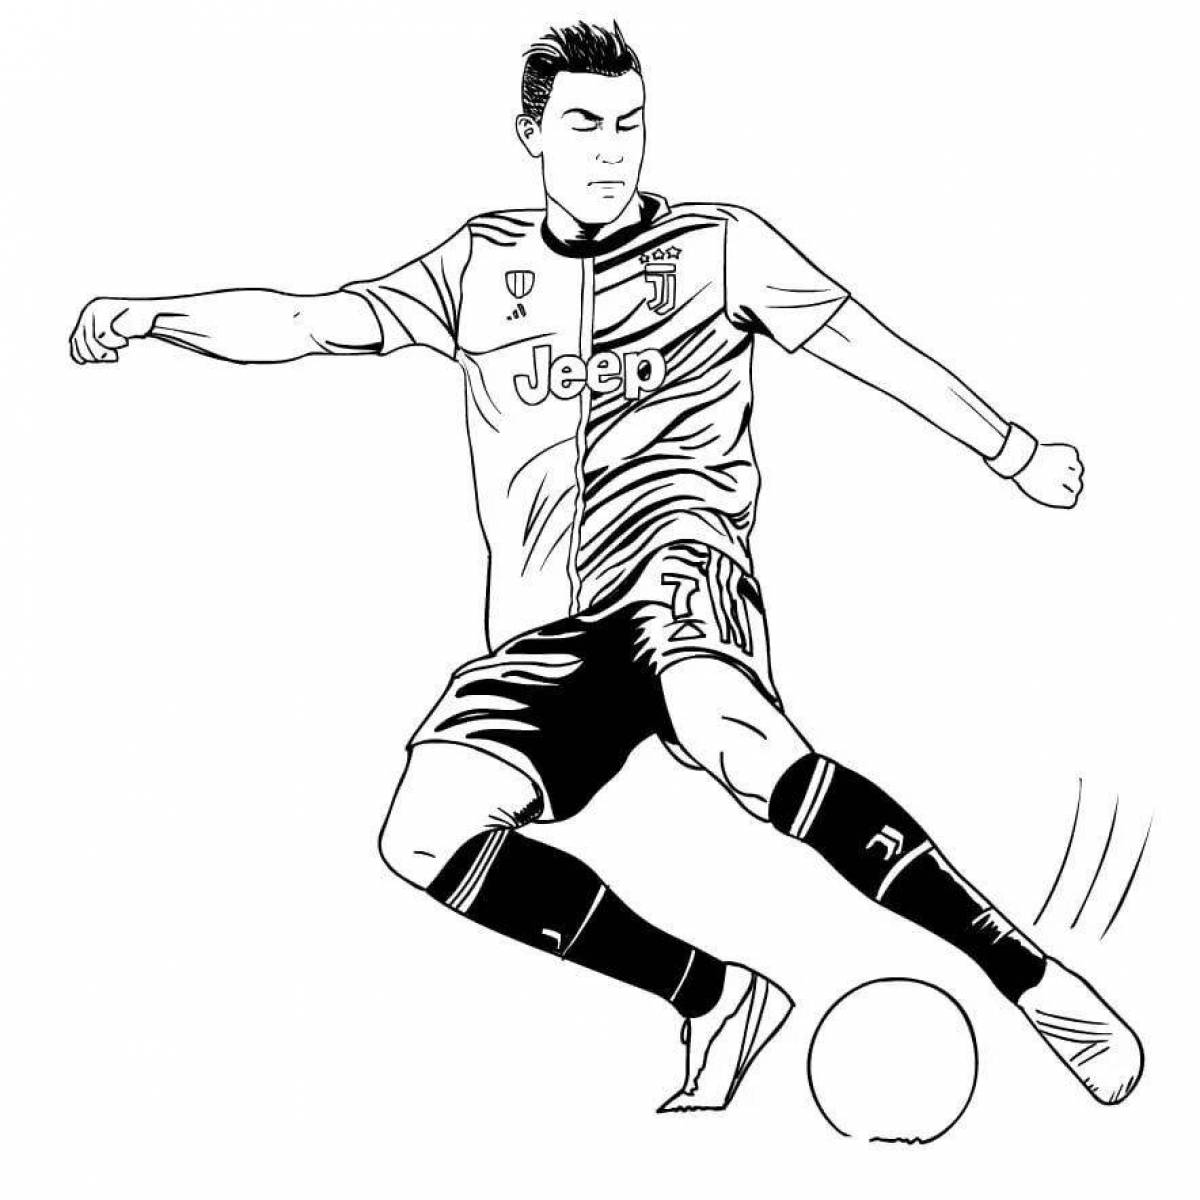 Animated soccer player with ball